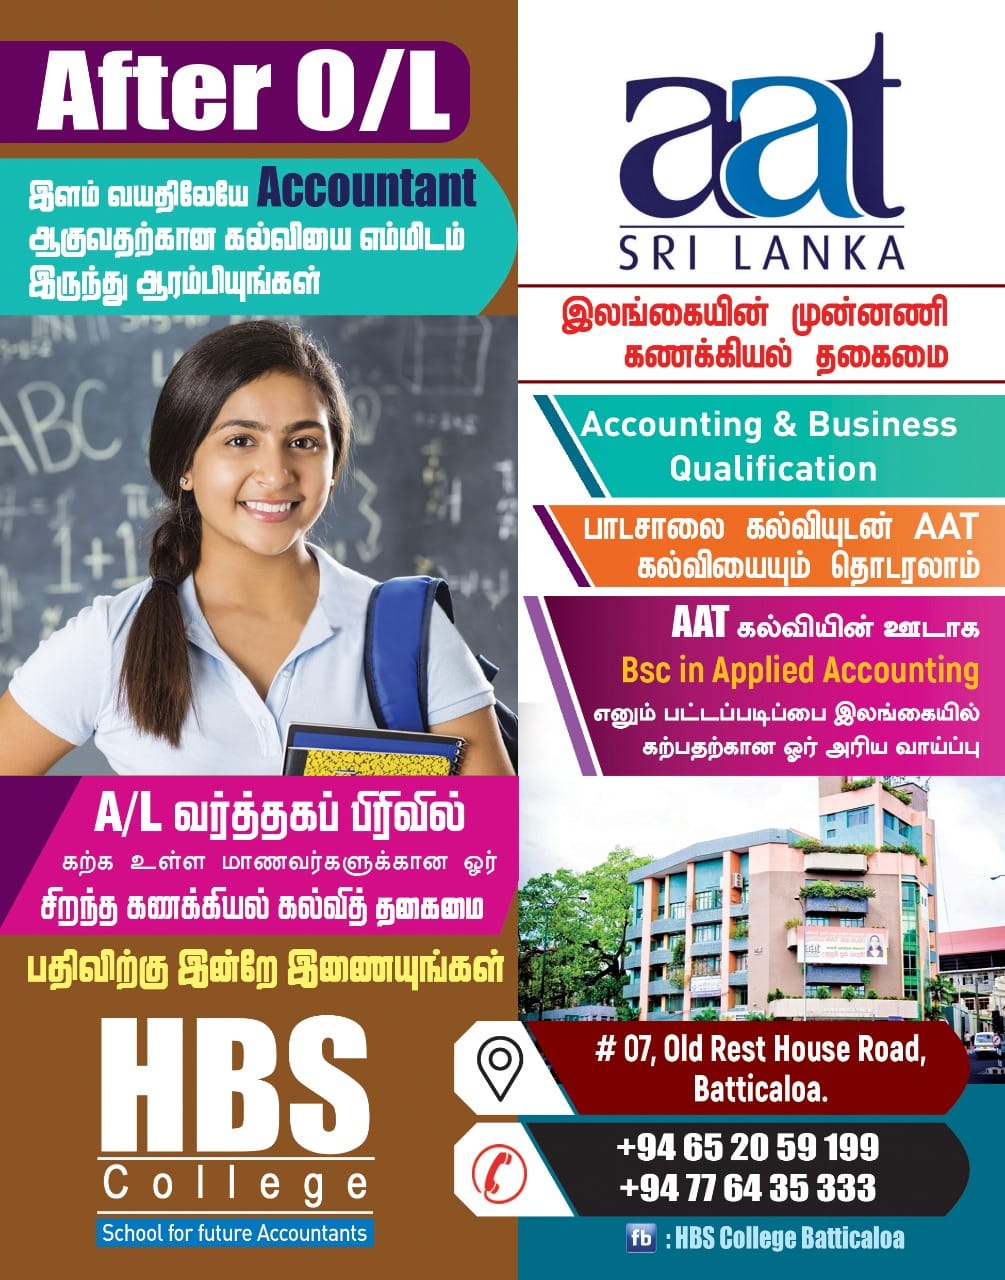 After O/L AAT Accounting Course in HBS College Batticaloa Accounting Course Details